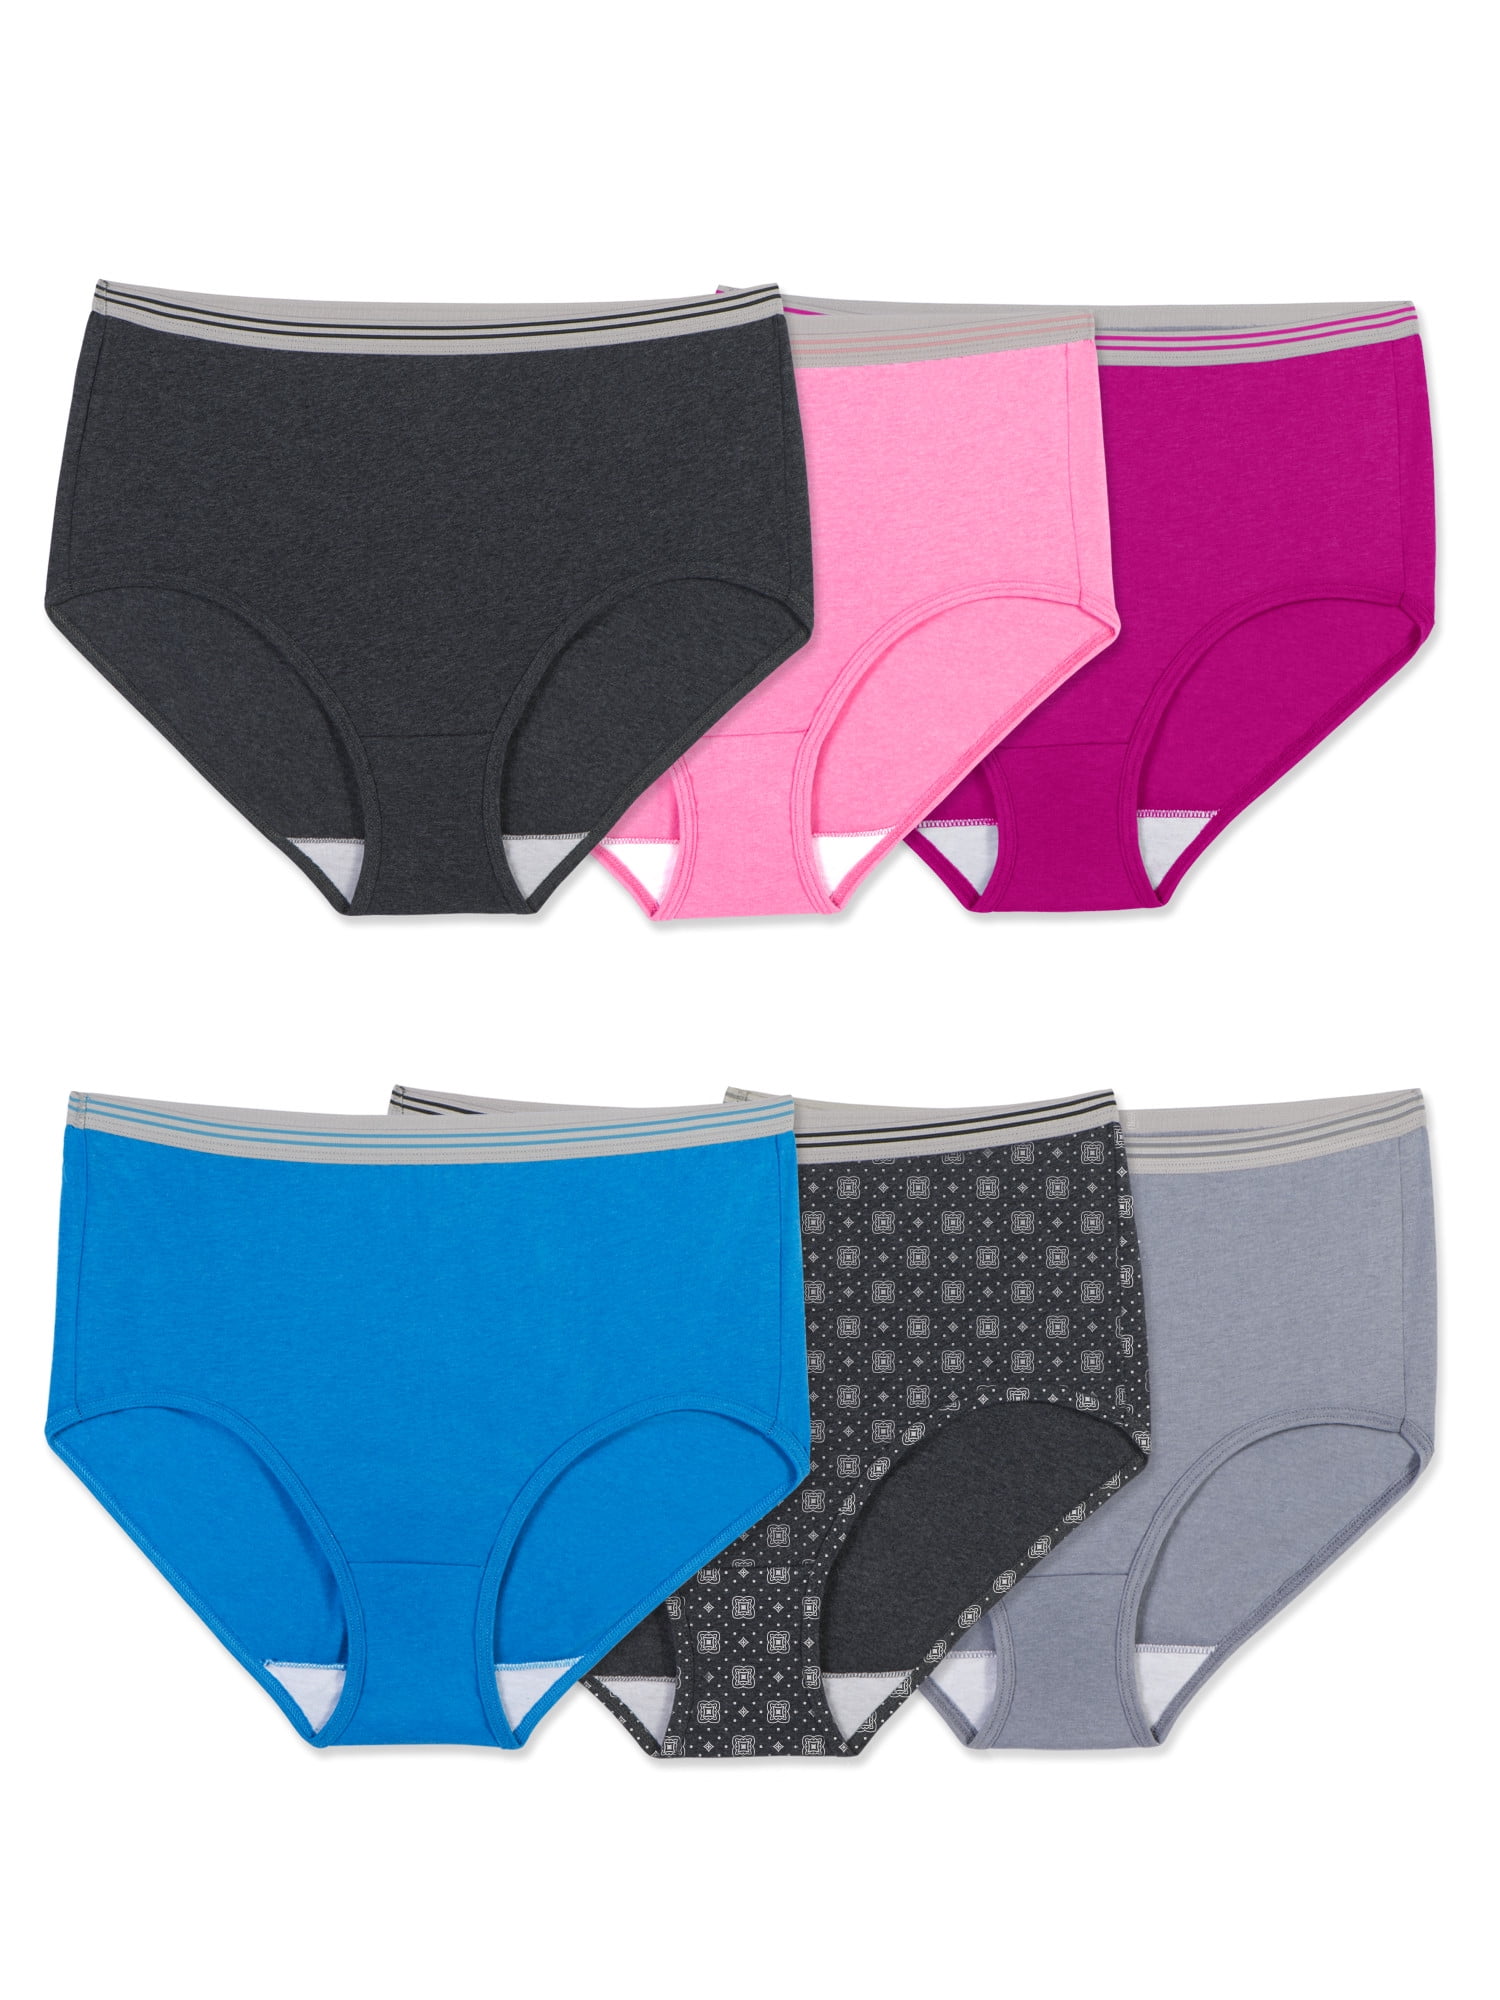 Women's Plus Fit for Me® Heather Brief Panty, Assorted 6 Pack